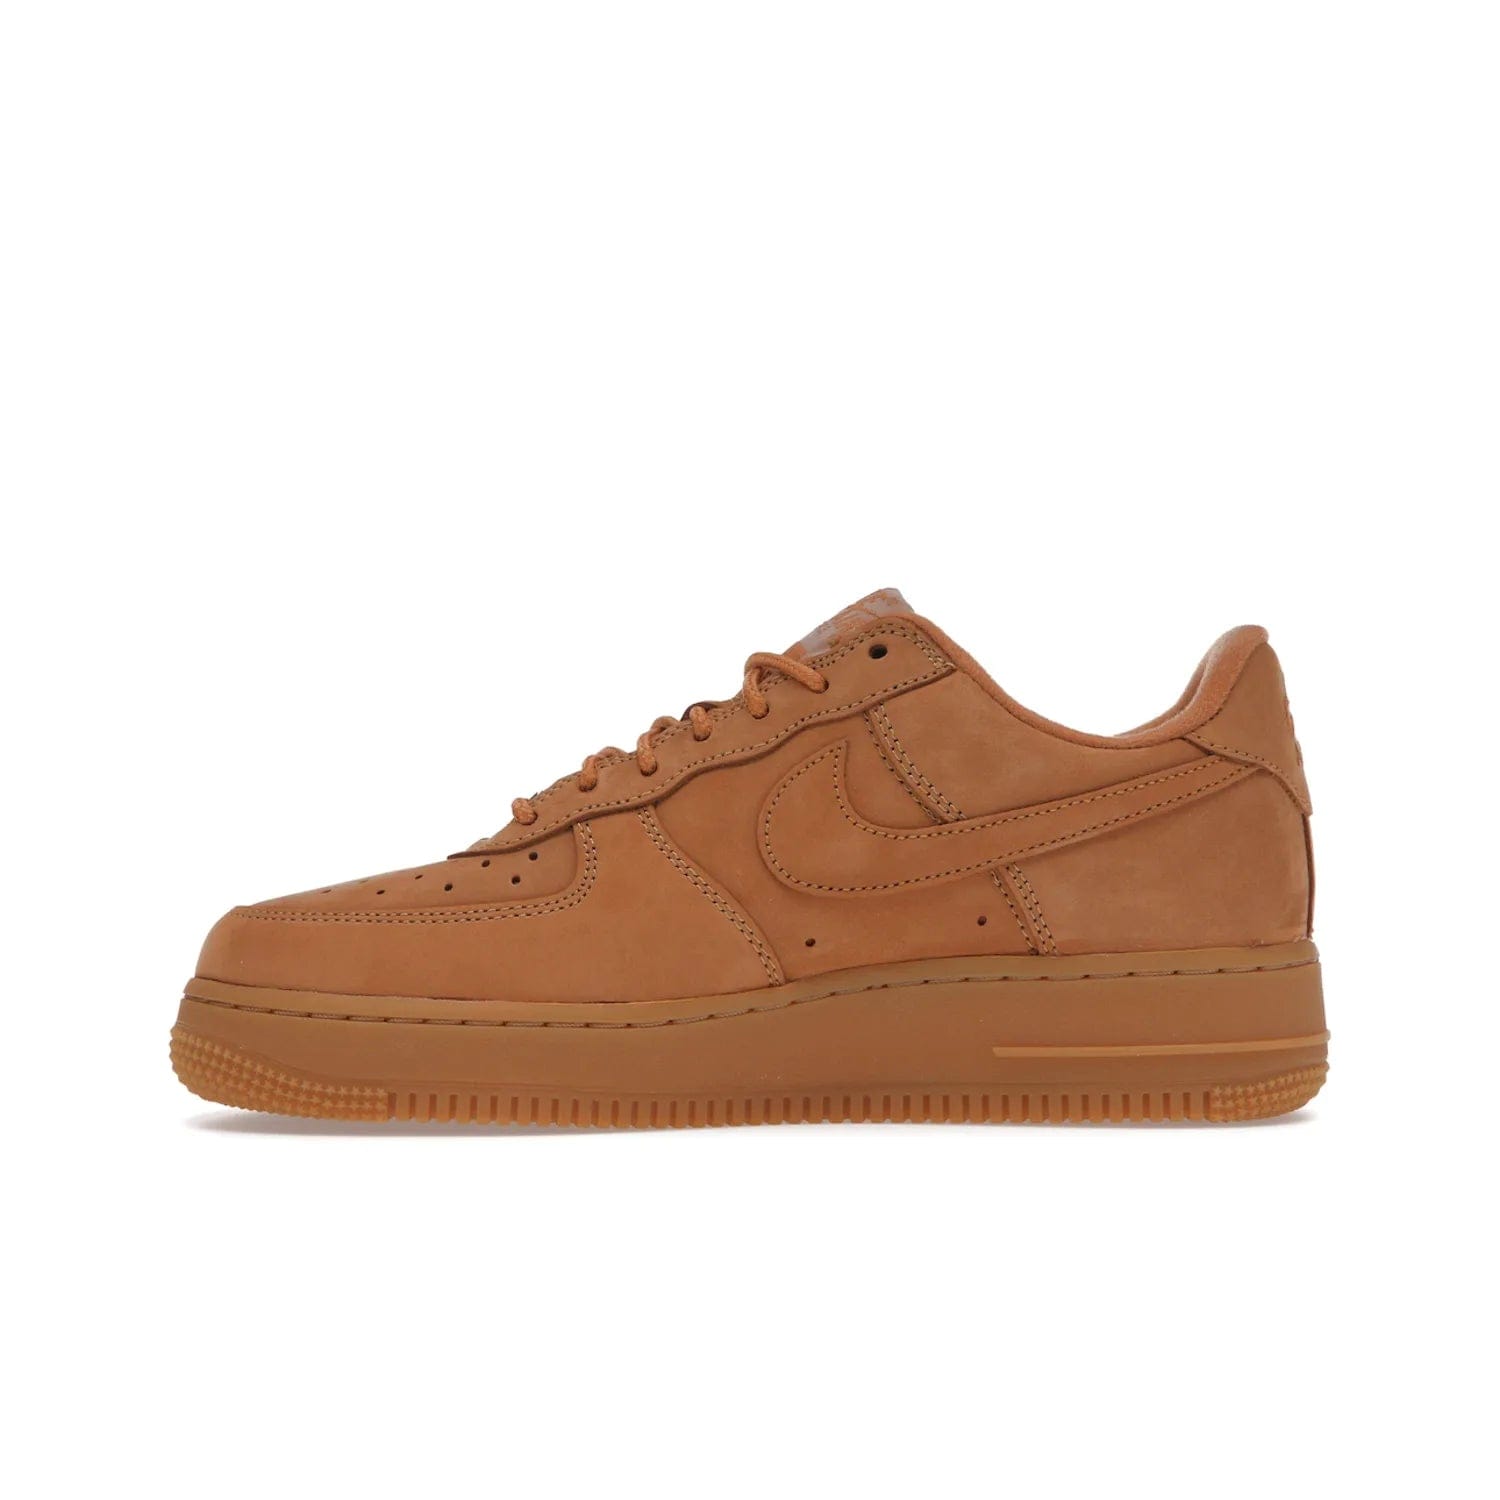 Nike Air Force 1 Low SP Supreme Wheat - Image 19 - Only at www.BallersClubKickz.com - A luxe Flax Durabuck upper and Supreme Box Logo insignias on the lateral heels make the Nike Air Force 1 Low SP Supreme Wheat a stylish lifestyle shoe. Matching Flax Air sole adds a classic touch to this collaboration between Nike and Supreme. Make a statement with this edition of the classic Air Force 1 Low.